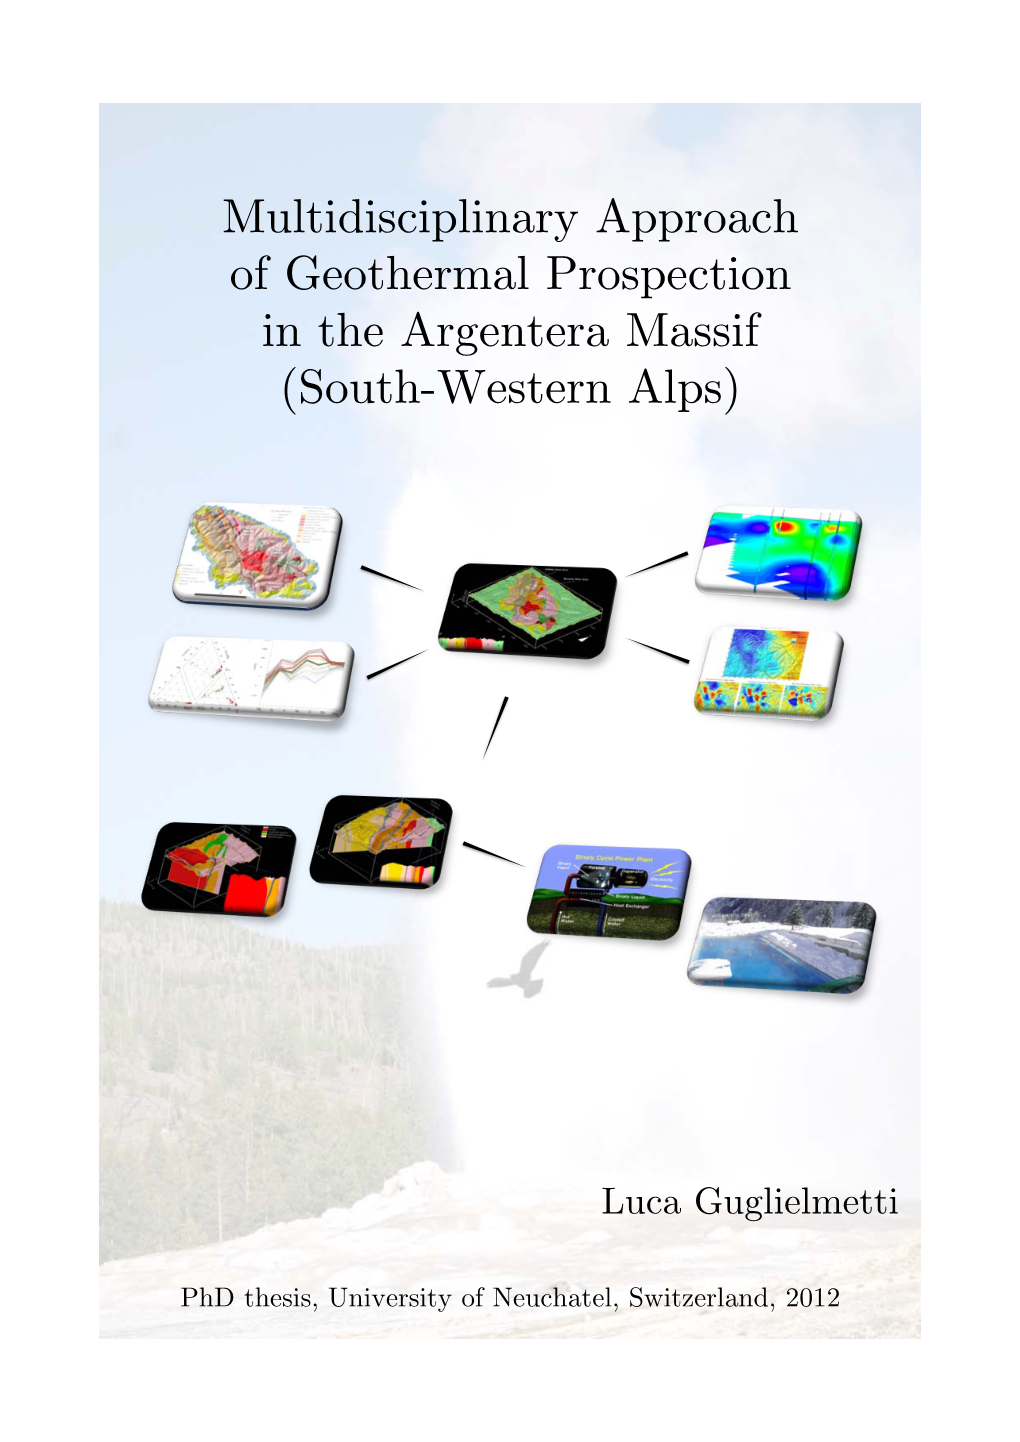 Multidisciplinary Approach of Geothermal Prospection in the Argentera Massif (South-Western Alps)